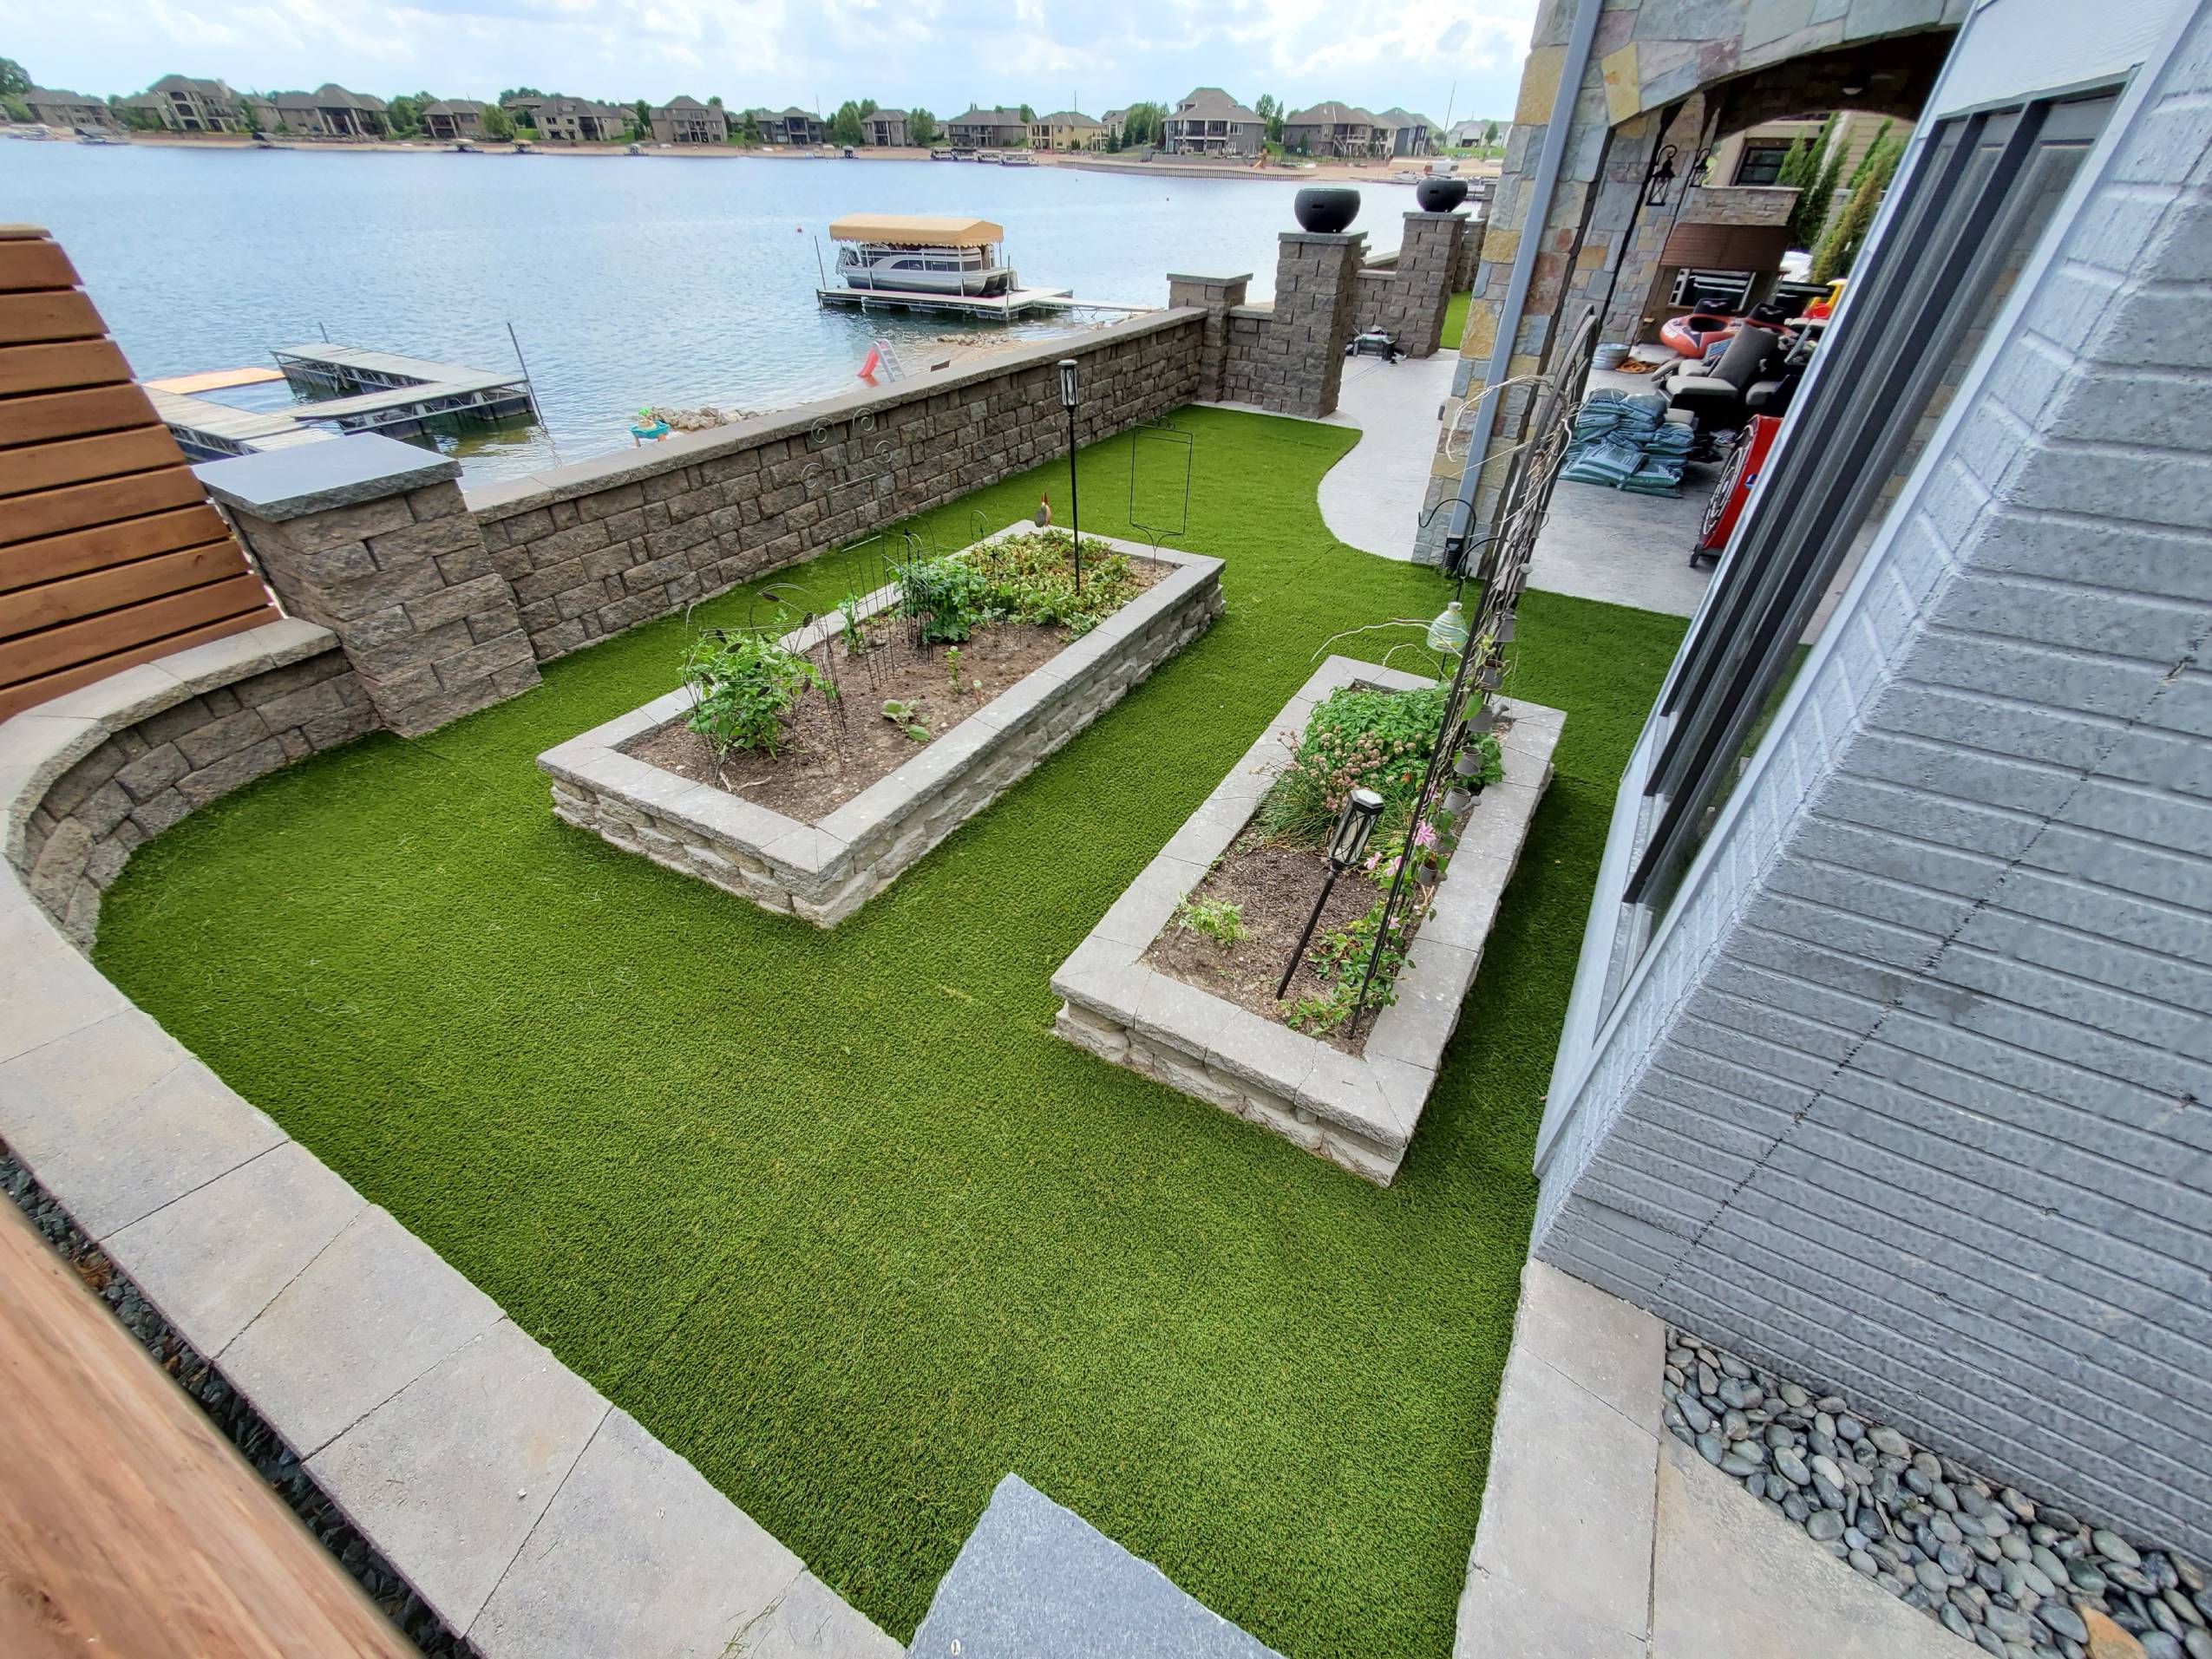 Dock area with artificial grass